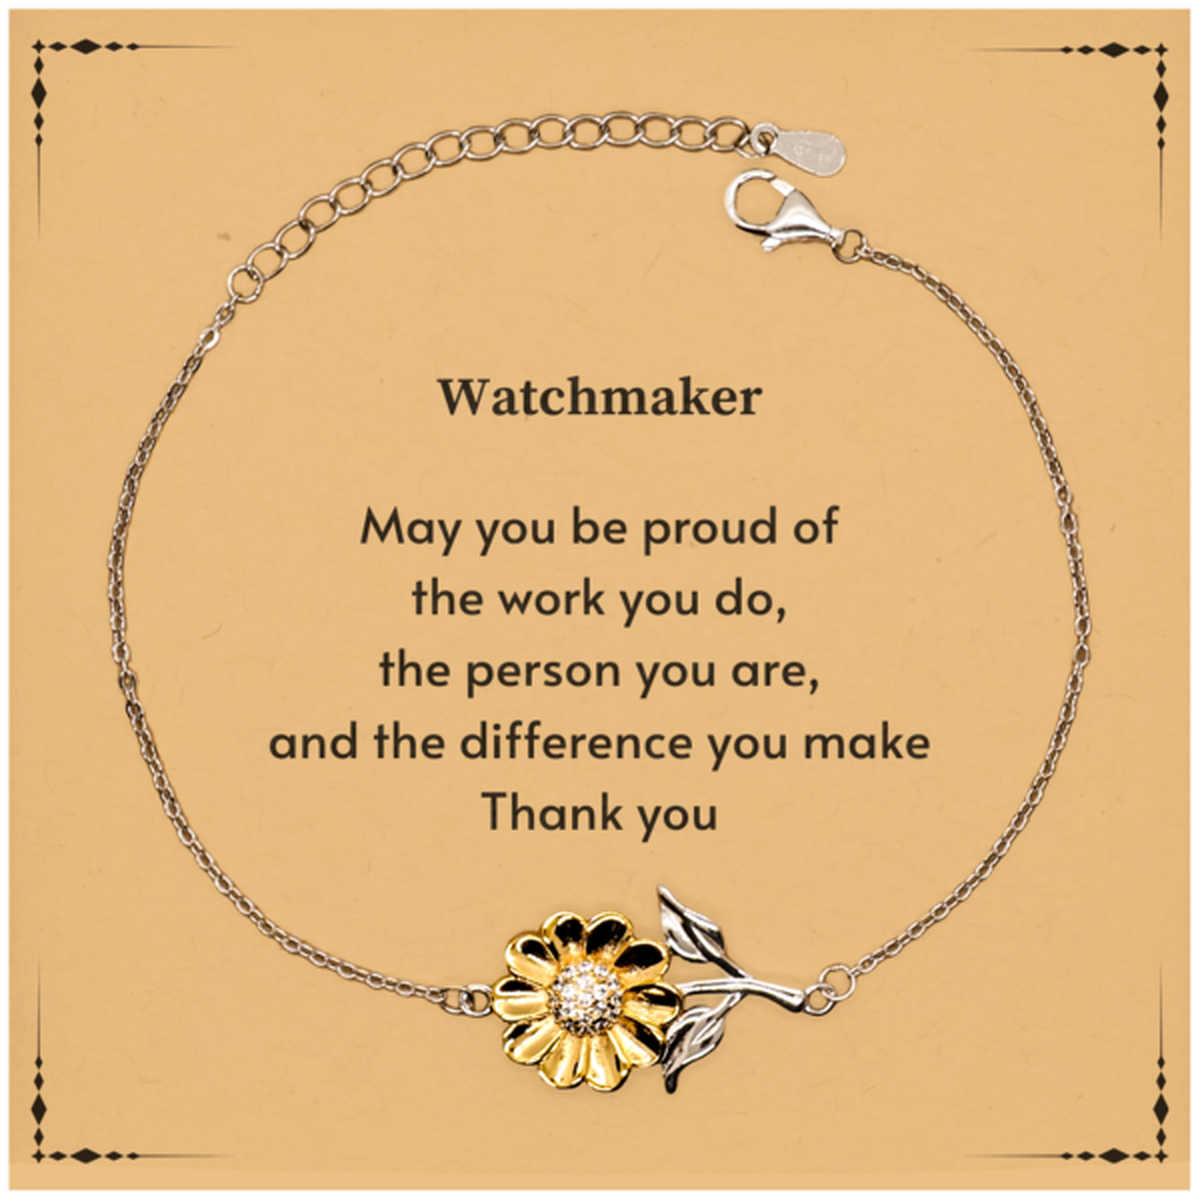 Heartwarming Sunflower Bracelet Retirement Coworkers Gifts for Watchmaker, Watchmaker May You be proud of the work you do, the person you are Gifts for Boss Men Women Friends